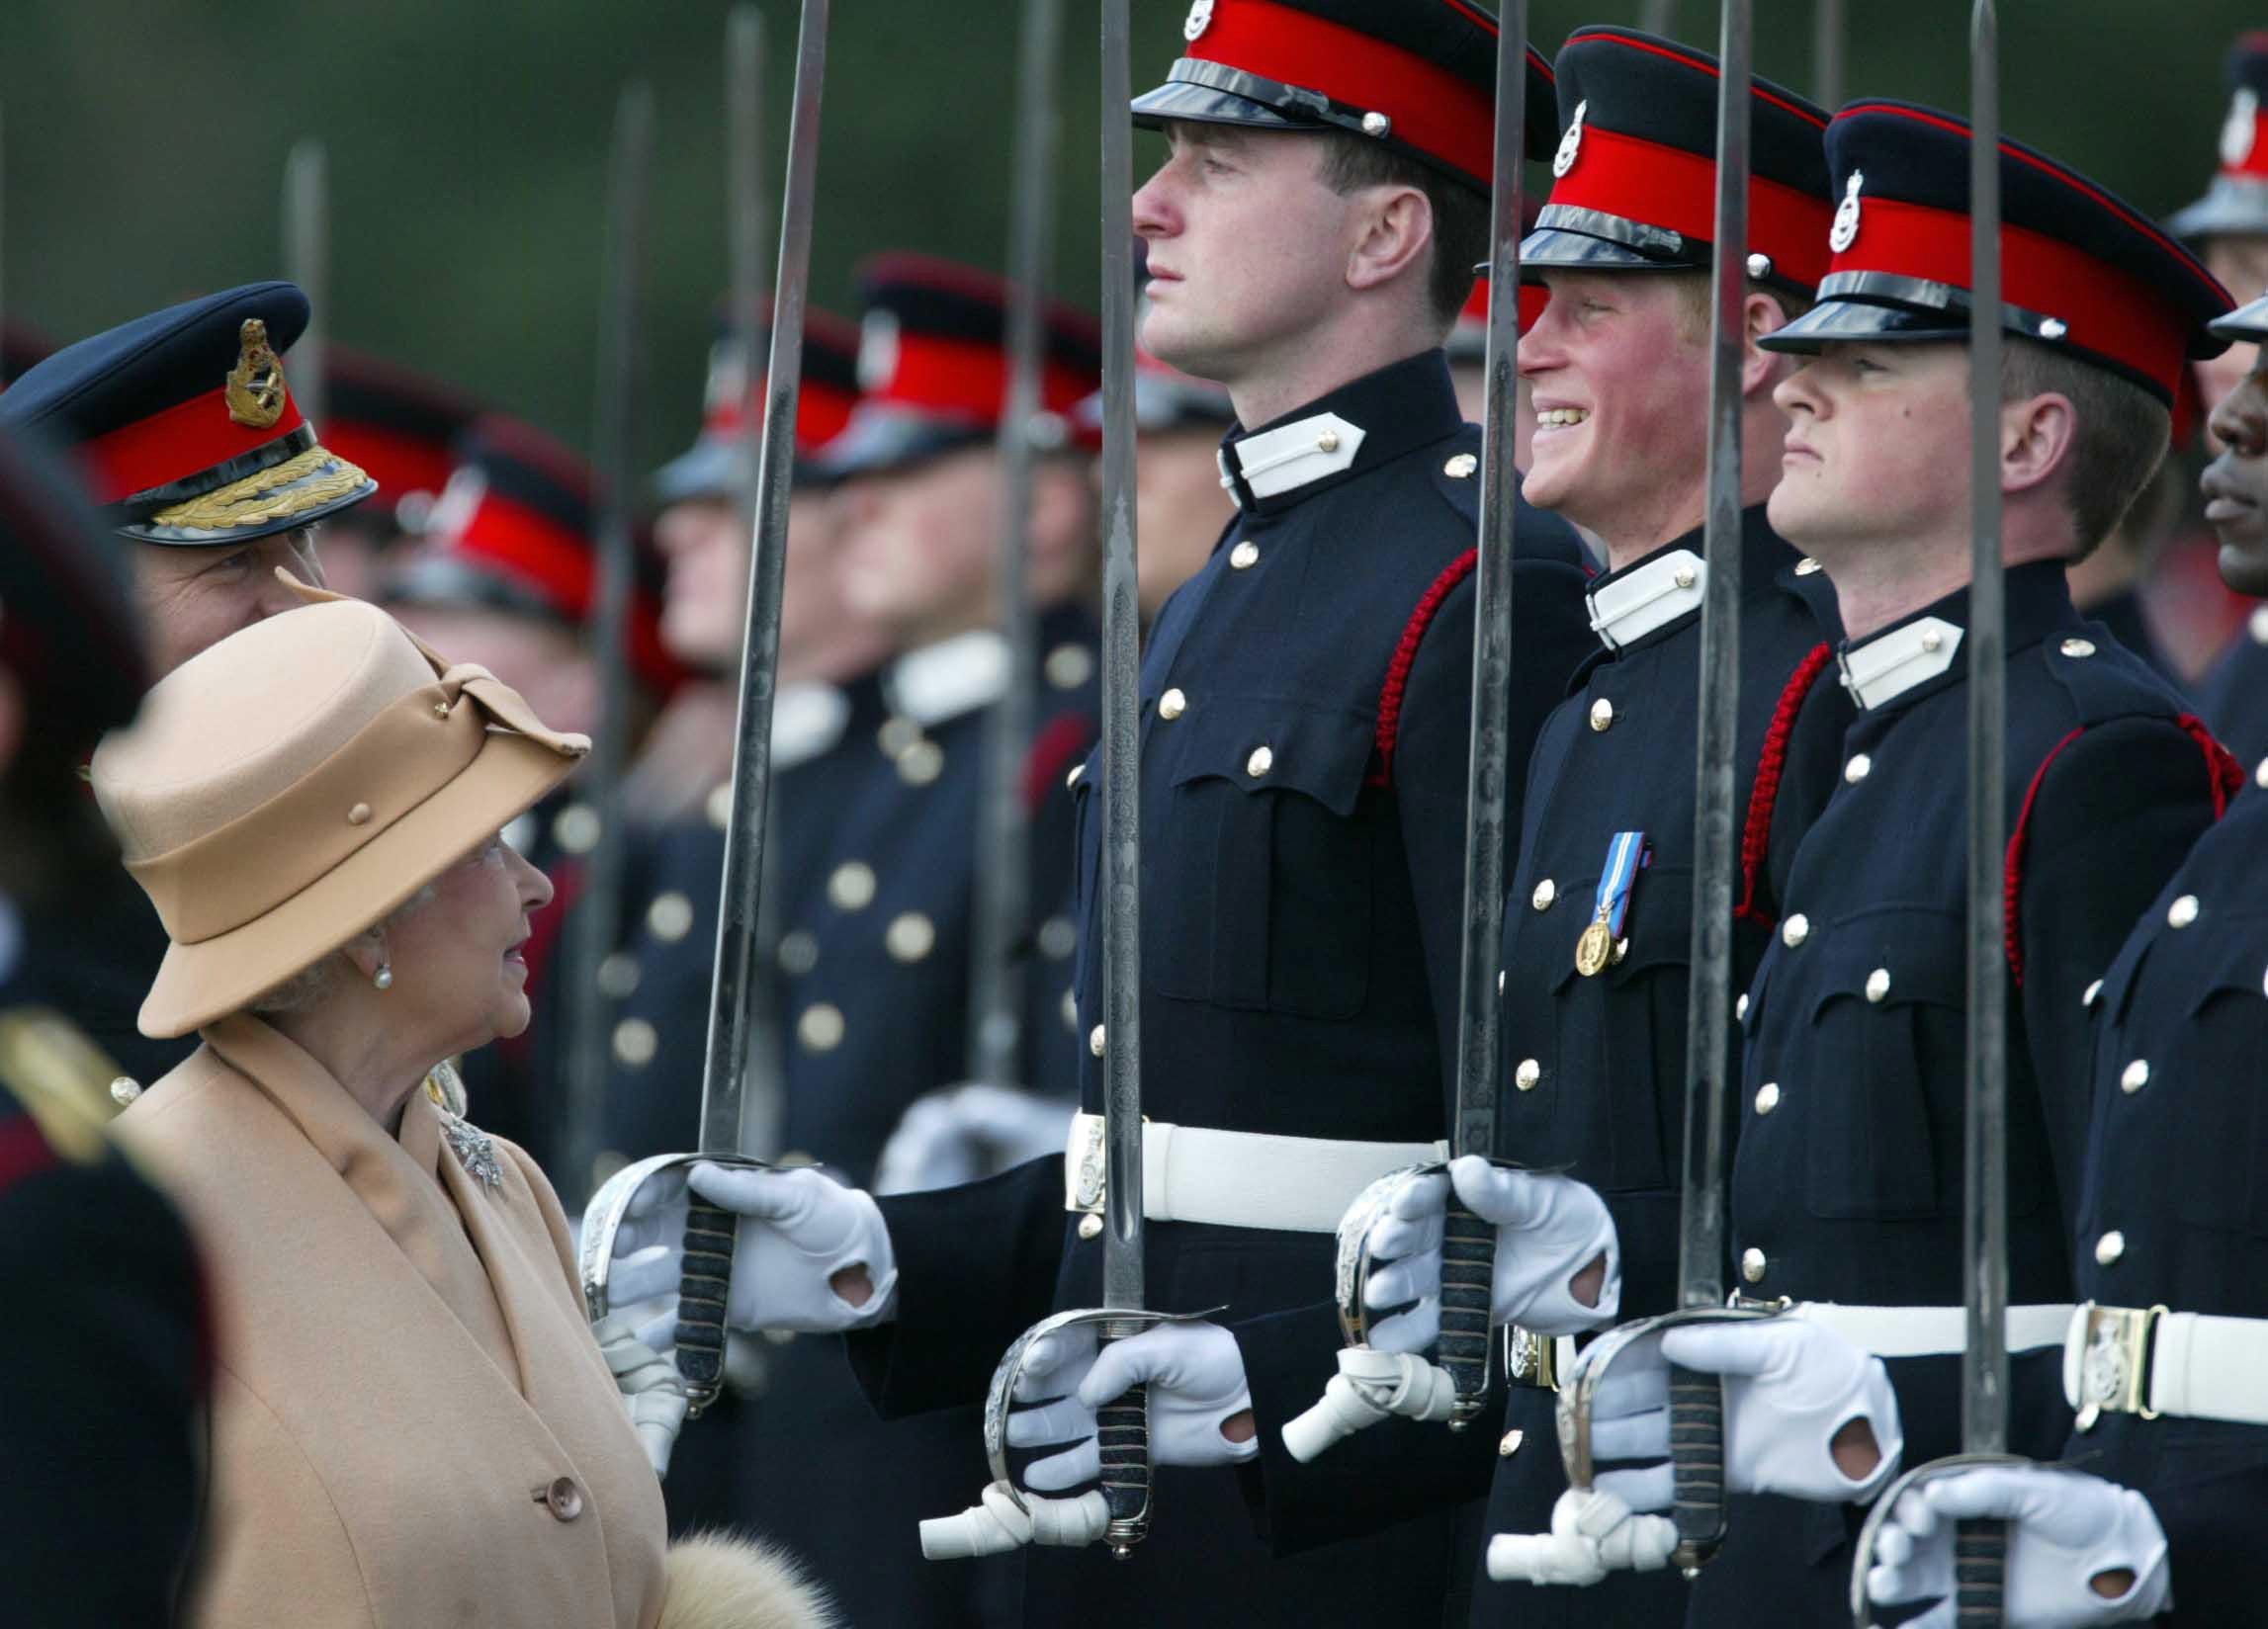 Harry smiling broadly as his grandmother the Queen reviewed him and other officers during the Sovereign’s Parade in 2006 (James Vellacott/PA)